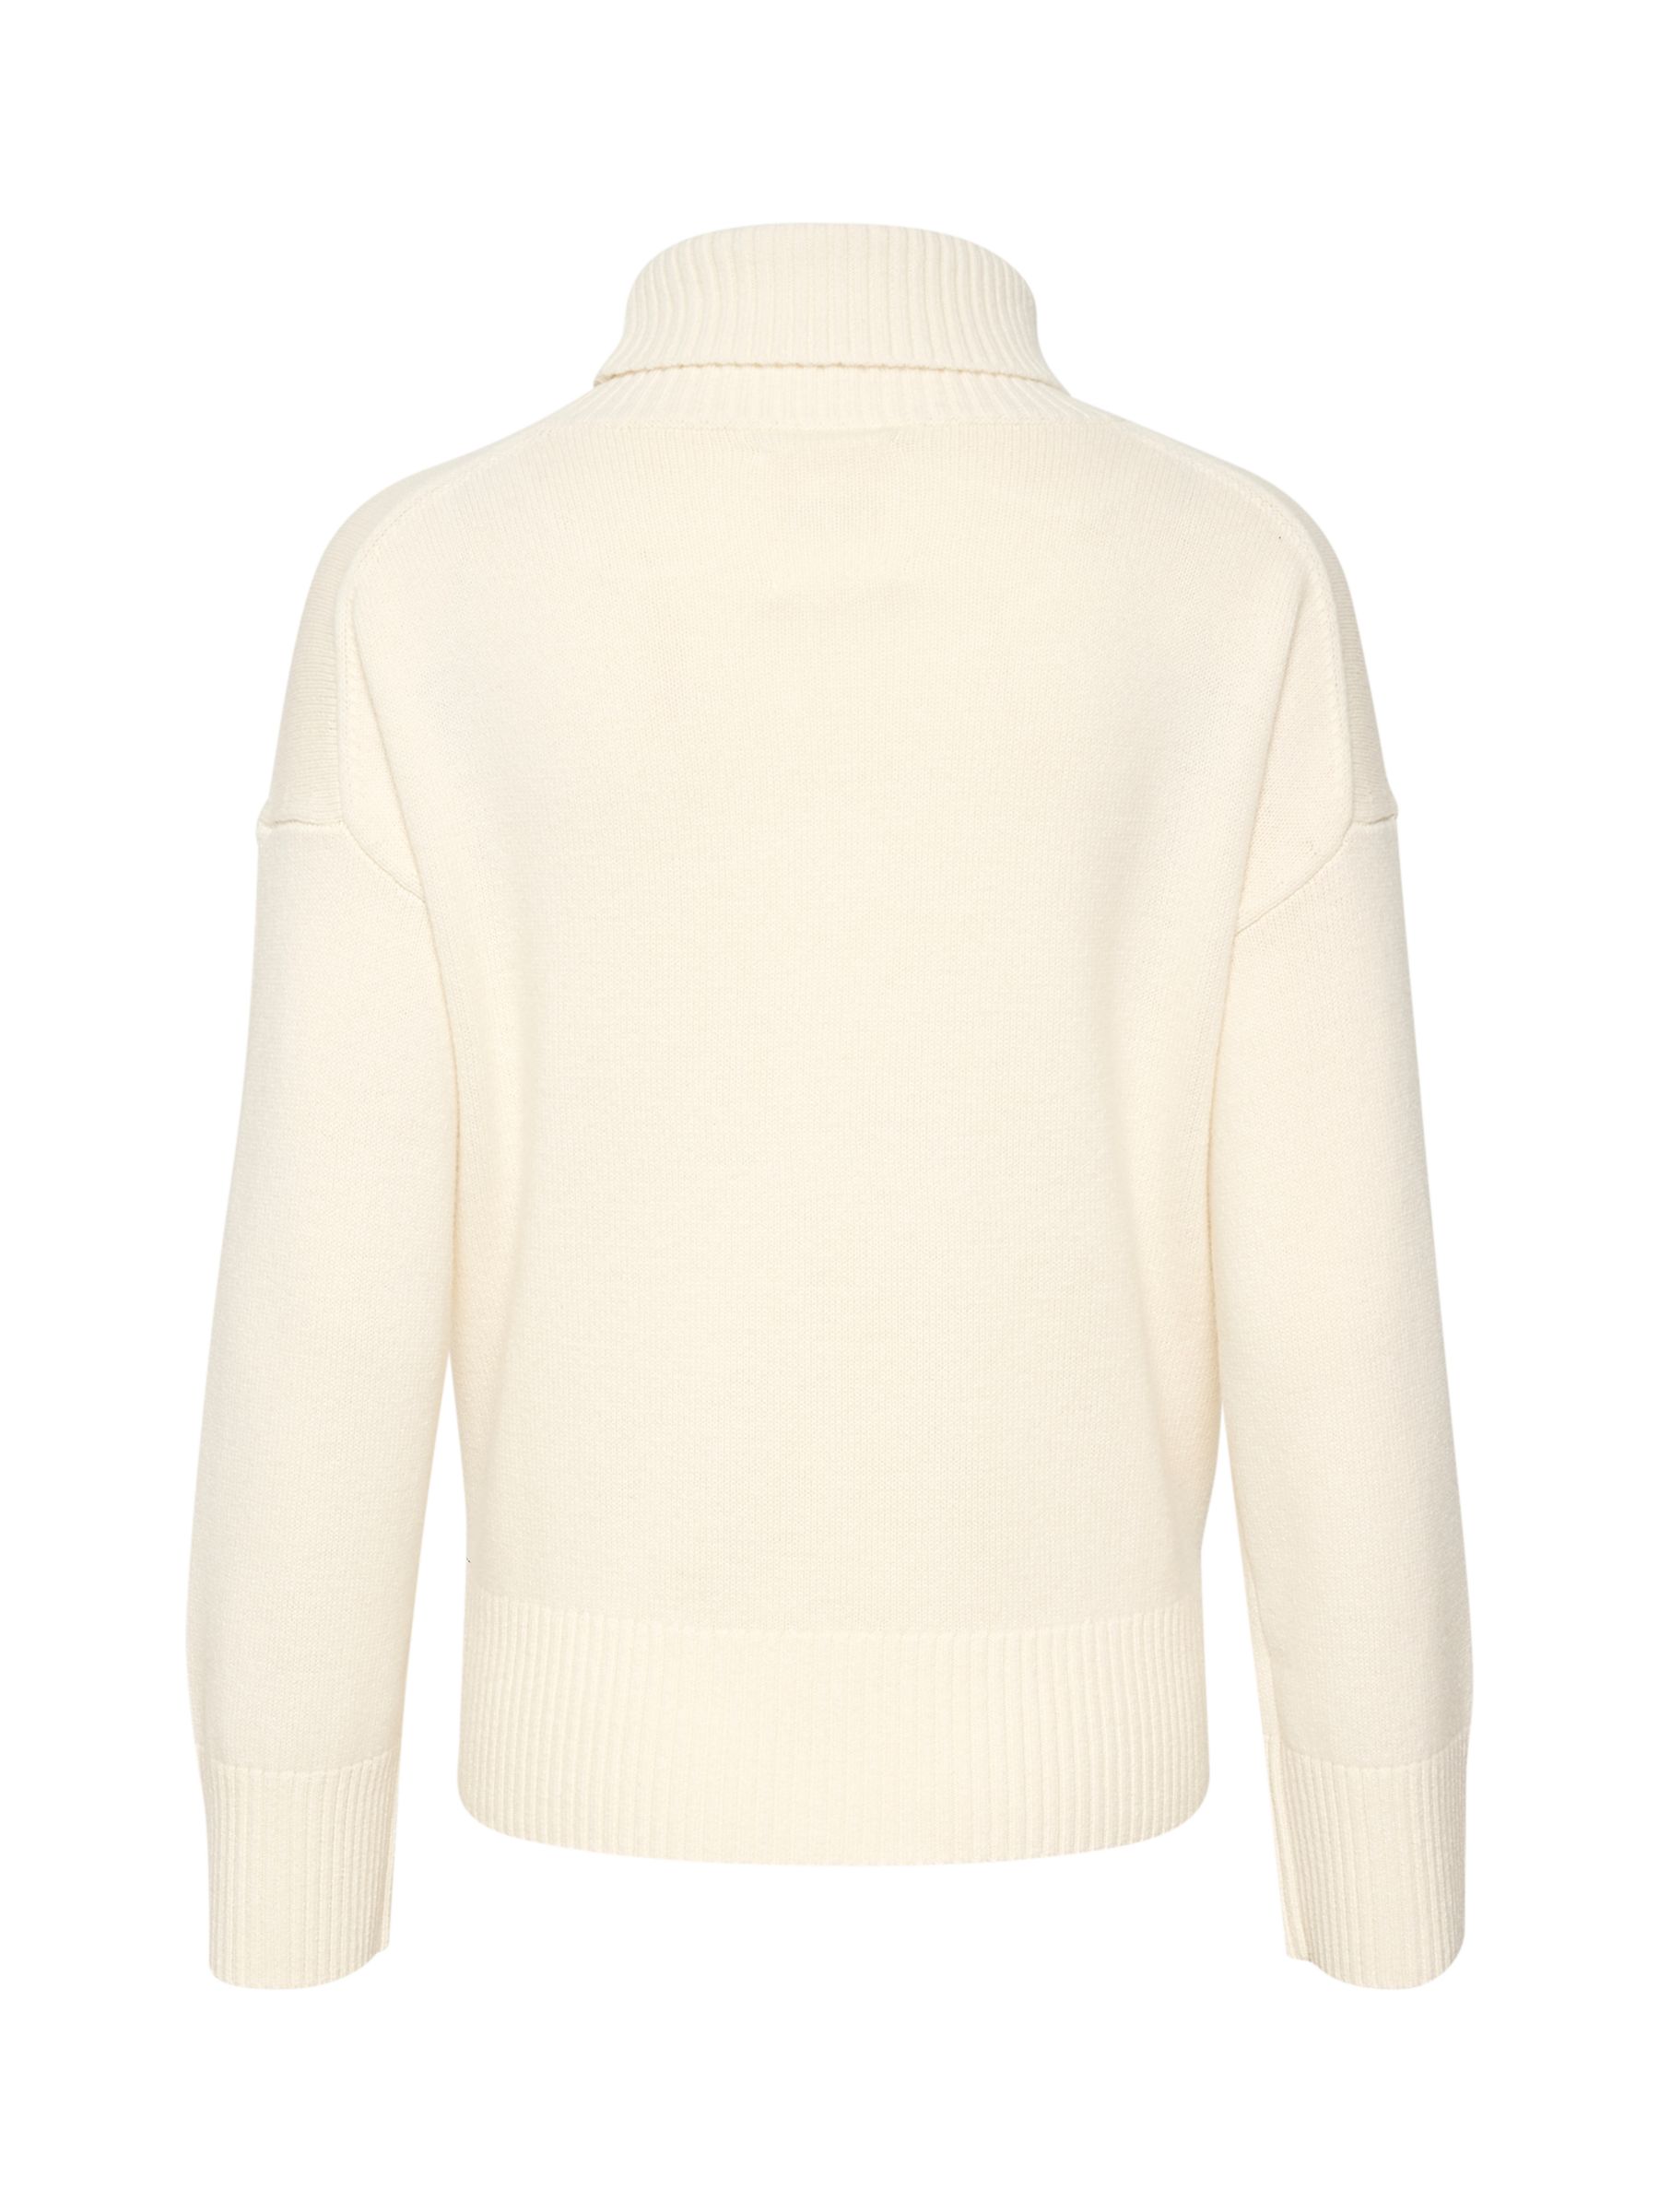 Buy Part Two Corina Roll Neck Wool Jumper Online at johnlewis.com